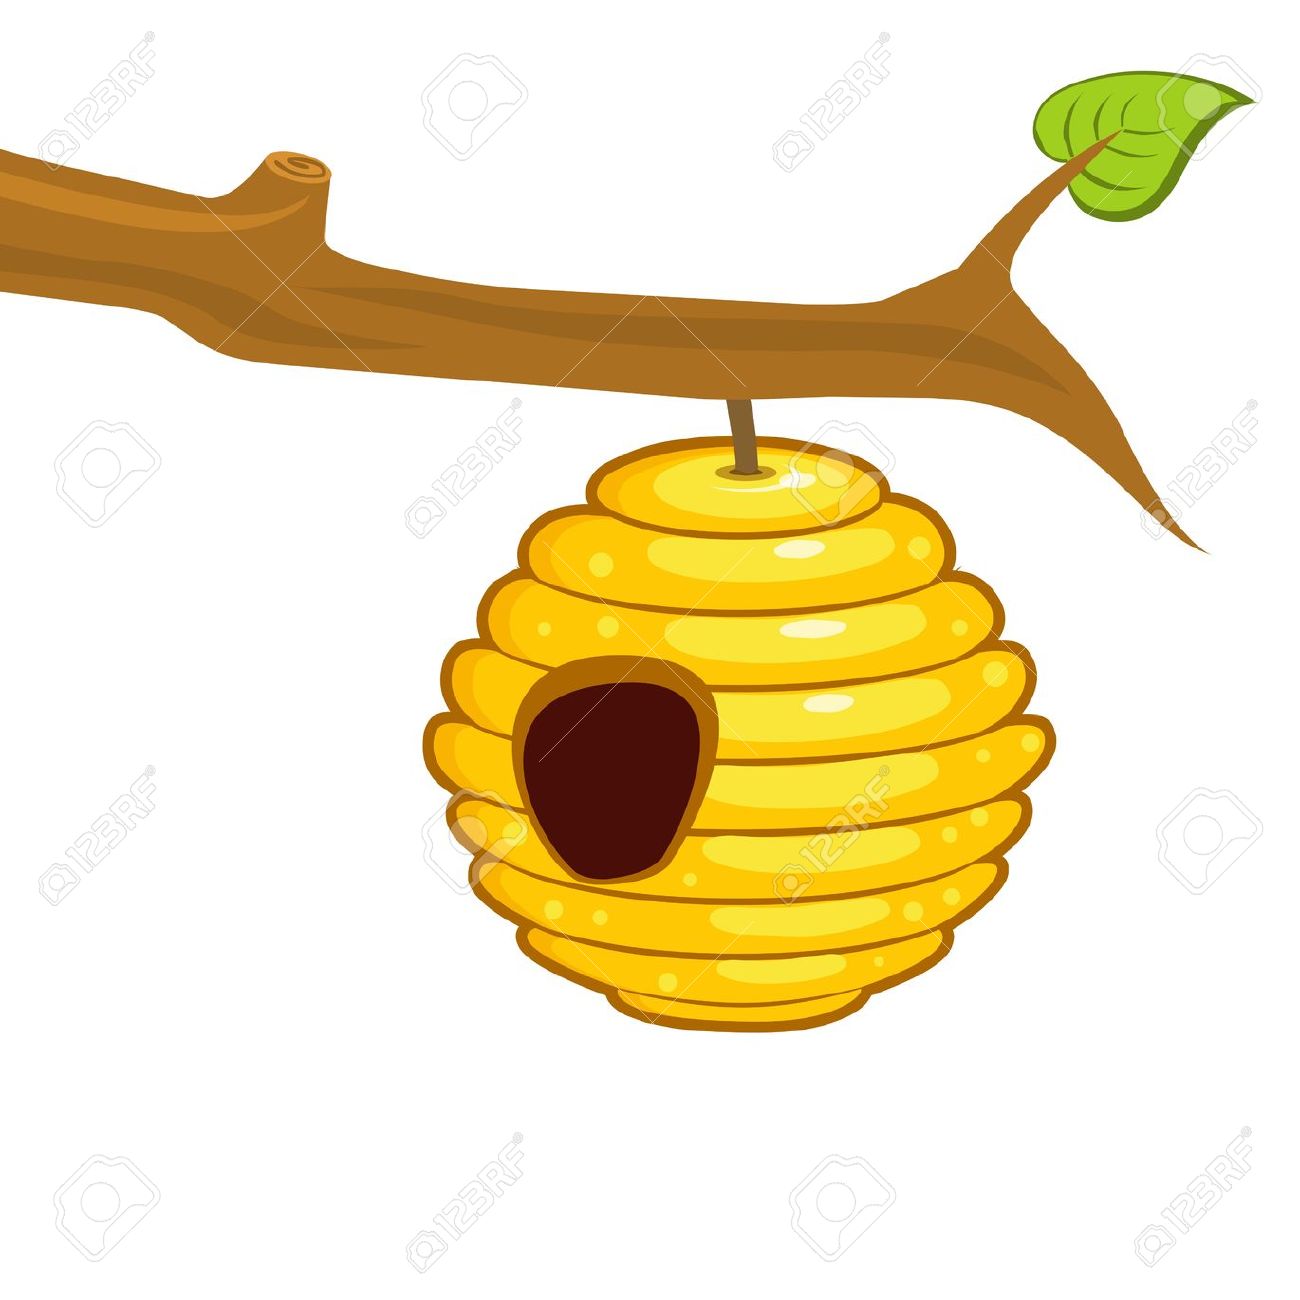 Beehive clipart .